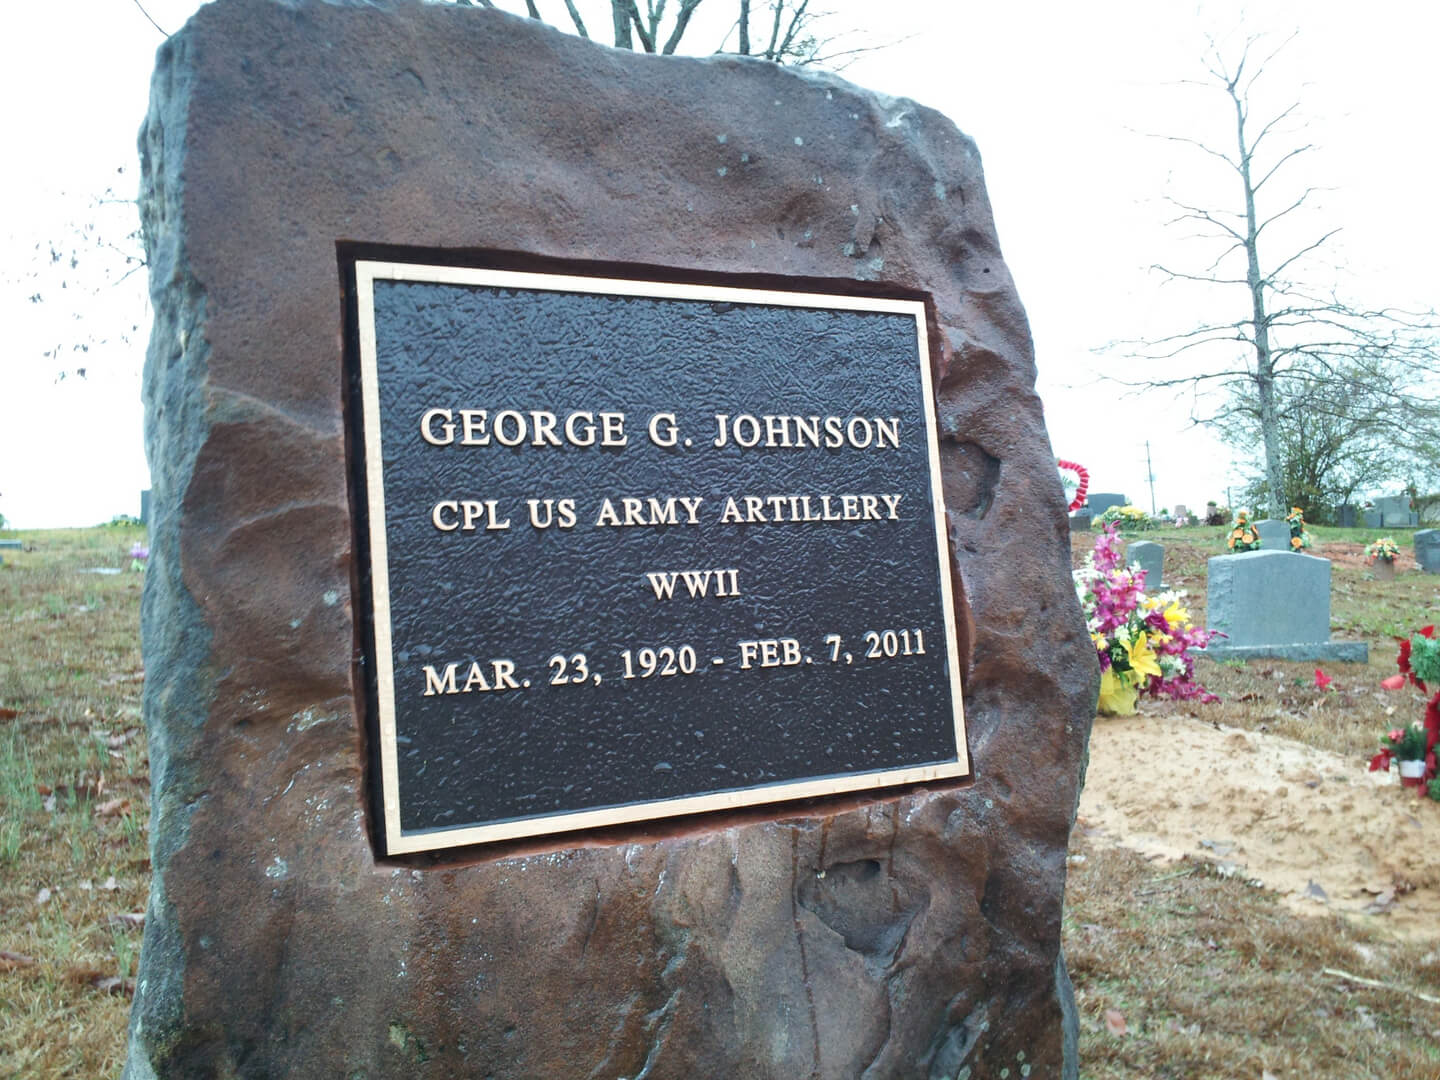 A memorial slab with the name George G. Jhonson